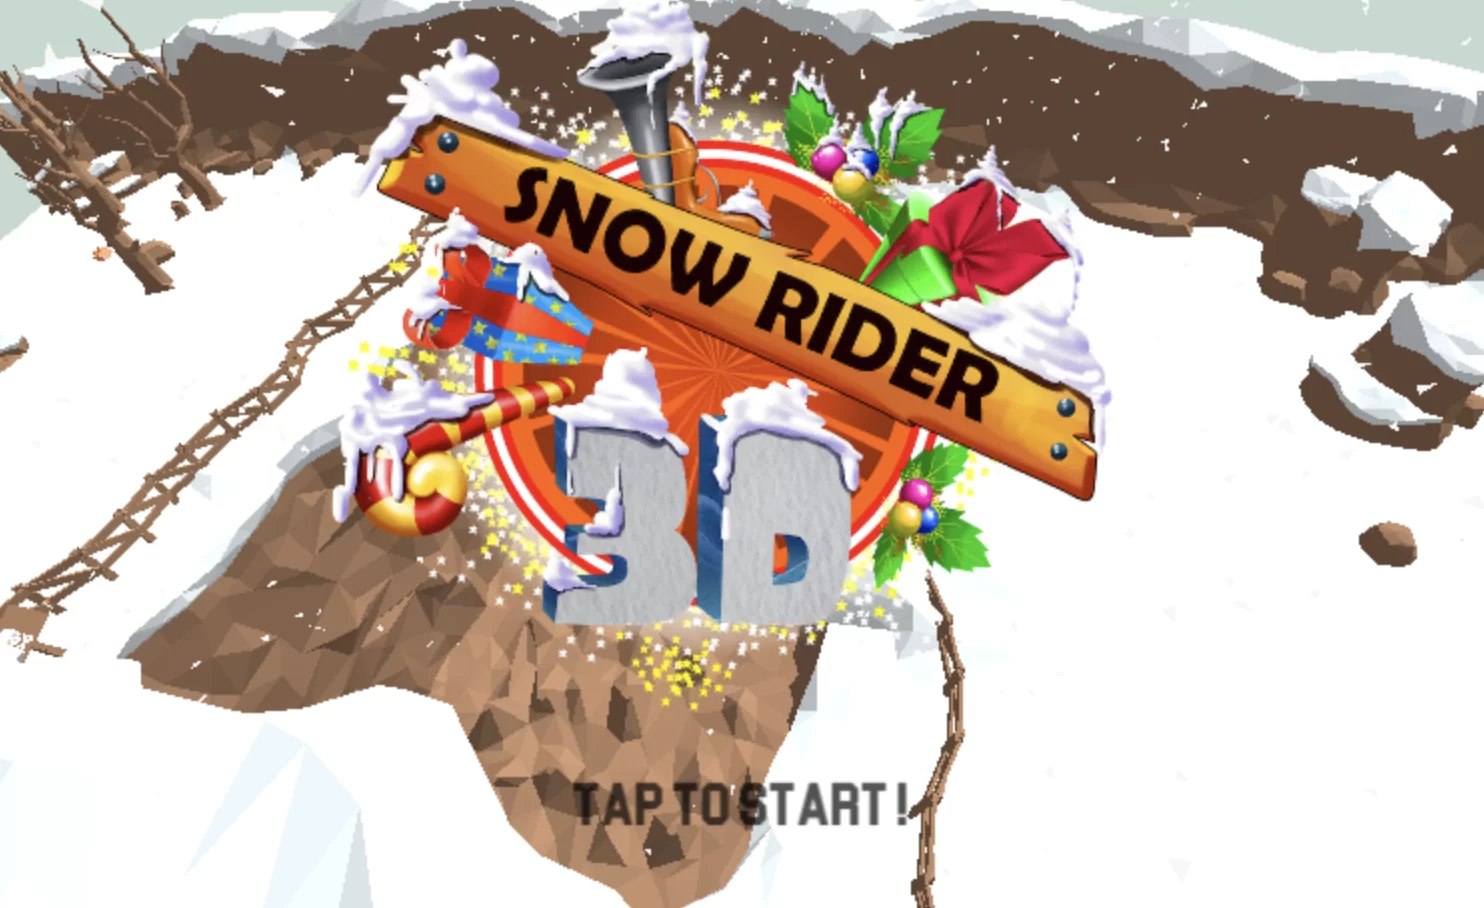 Snow Rider Unblocked: A Thrilling Adventure on the Slopes